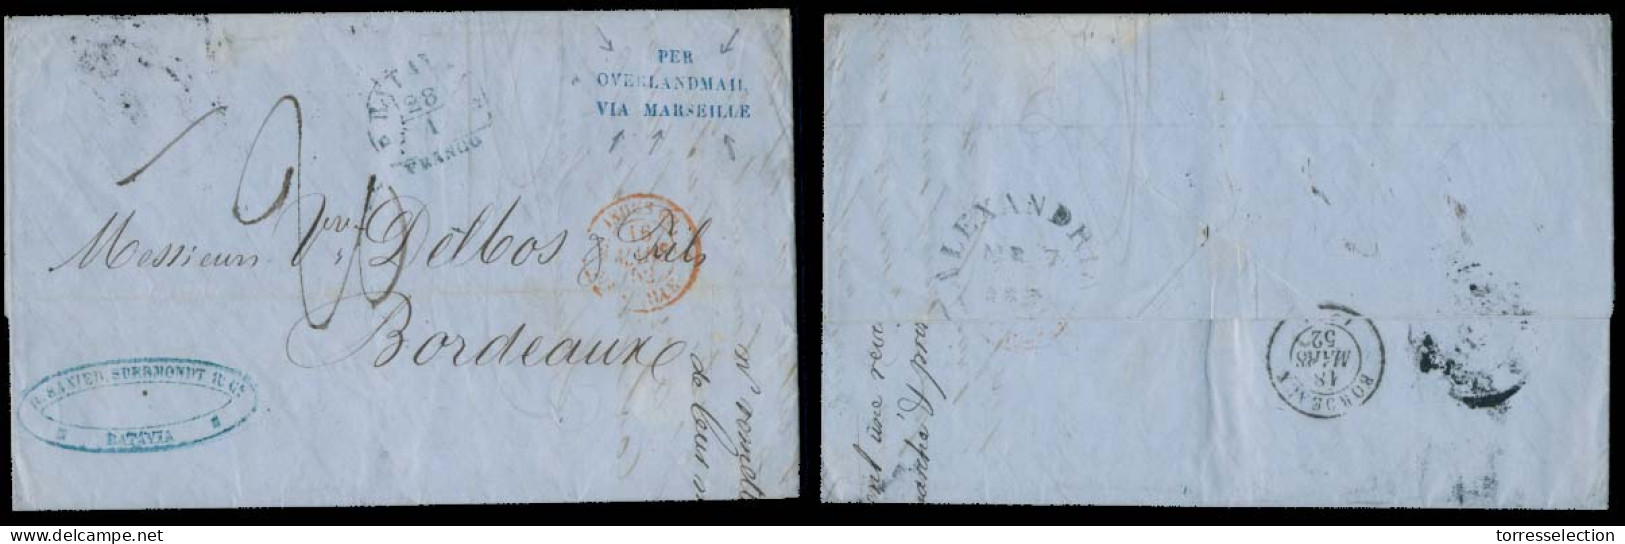 DUTCH INDIES. 1851 (20 Jan). Batavia - France (15 March). Stampless EL Full Contains Blue Franco Cds + Per Overland Mail - Indonesia